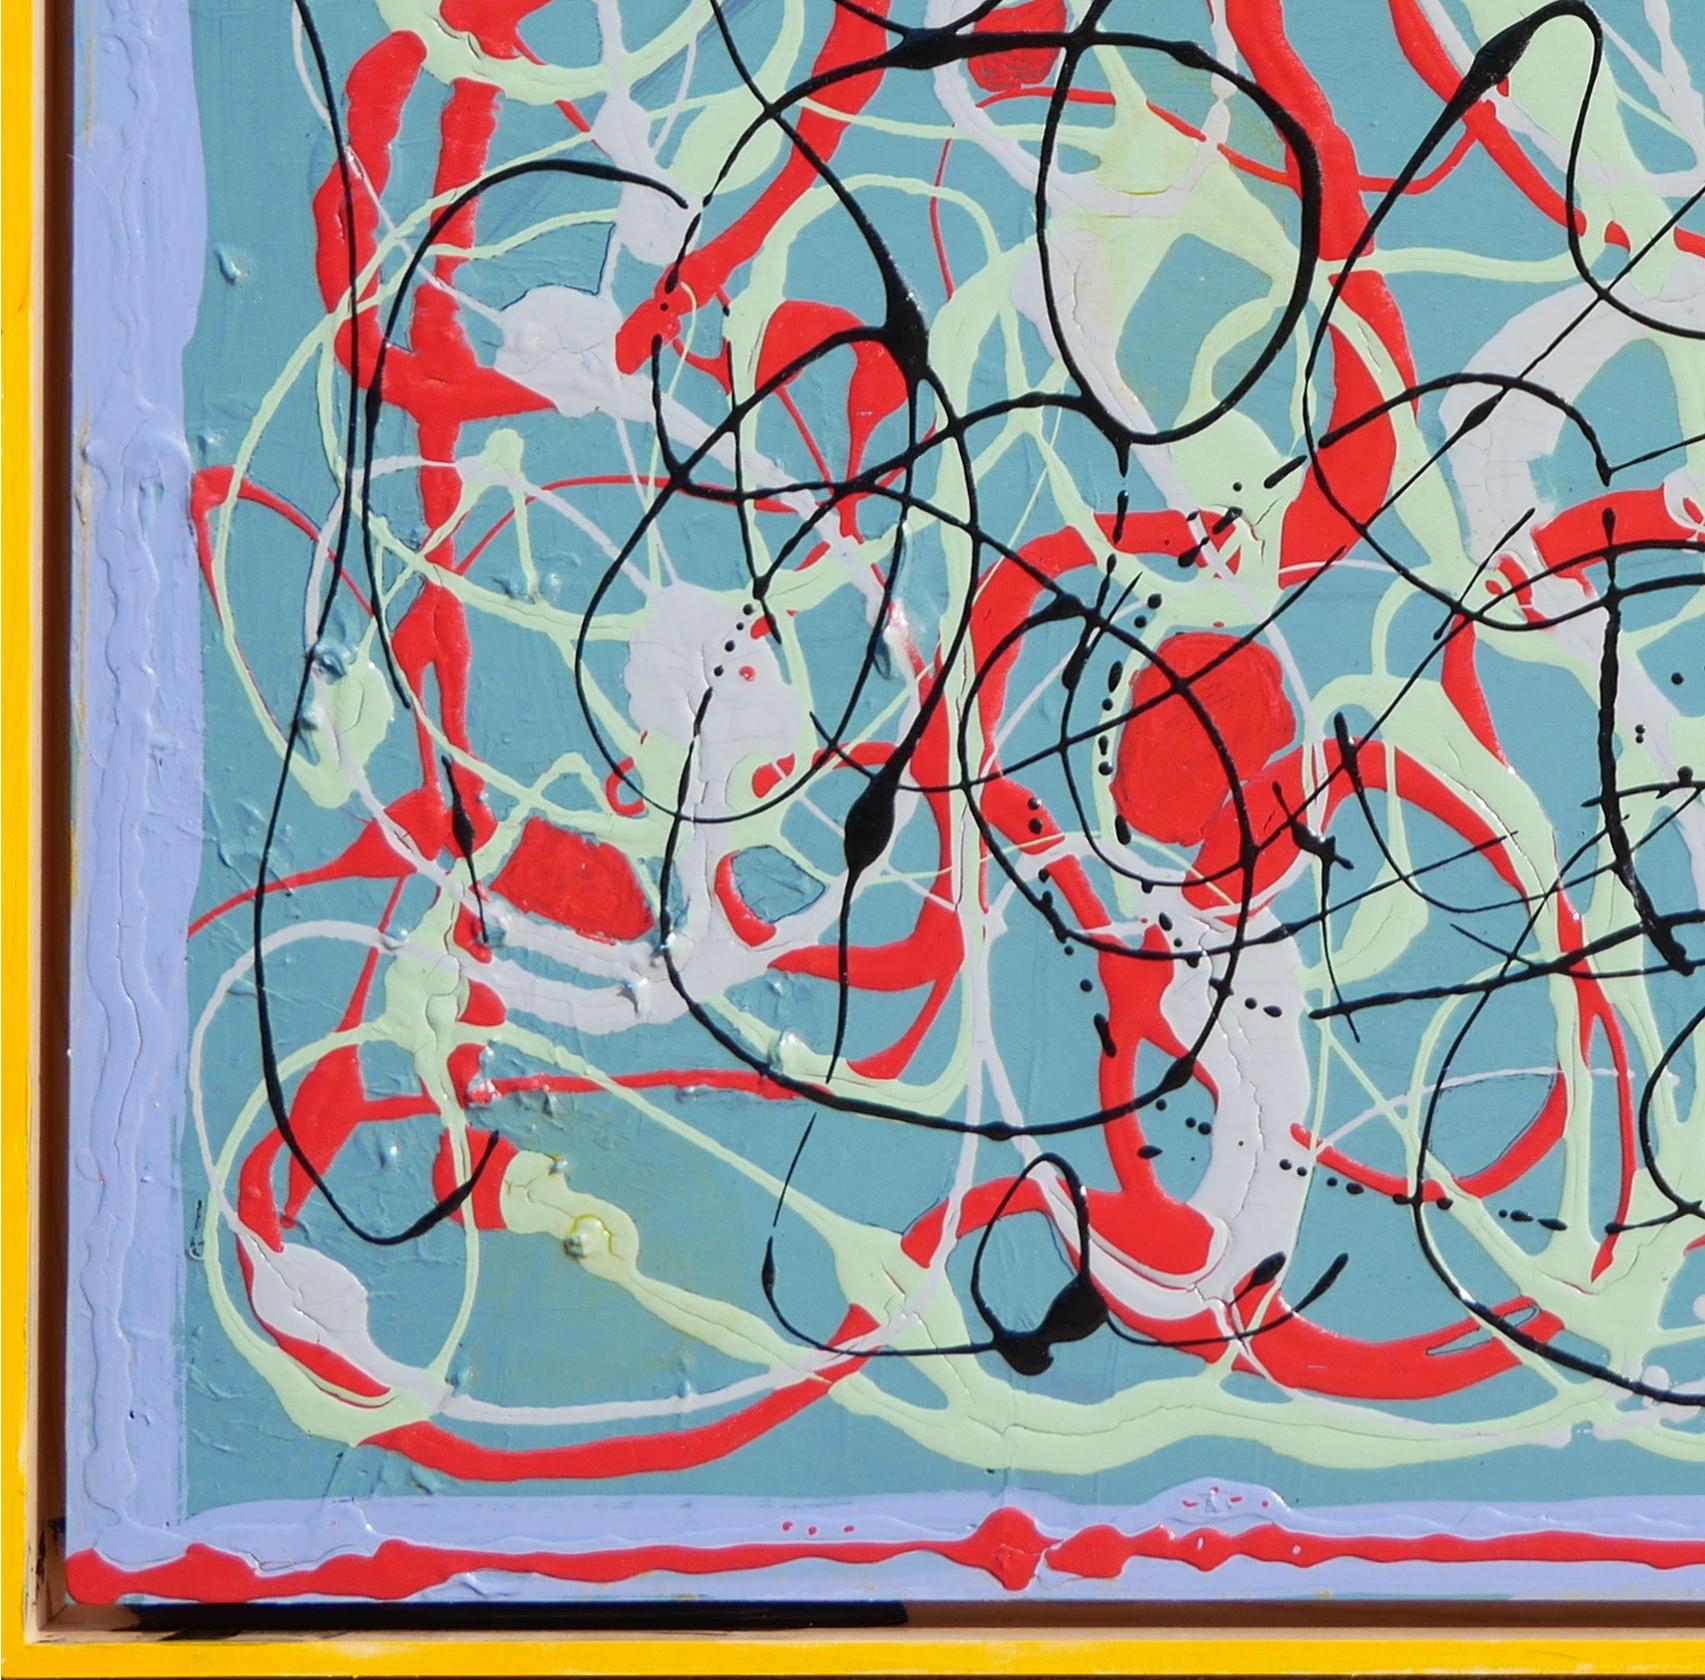 Abstract expressionist painting by Reeves Art + Design owner and Houston, TX artist Paul Reeves. This painting features colorful expressionist pastel green, red, lavender, and black swirls against a light blue background. Signed, dated, and titled